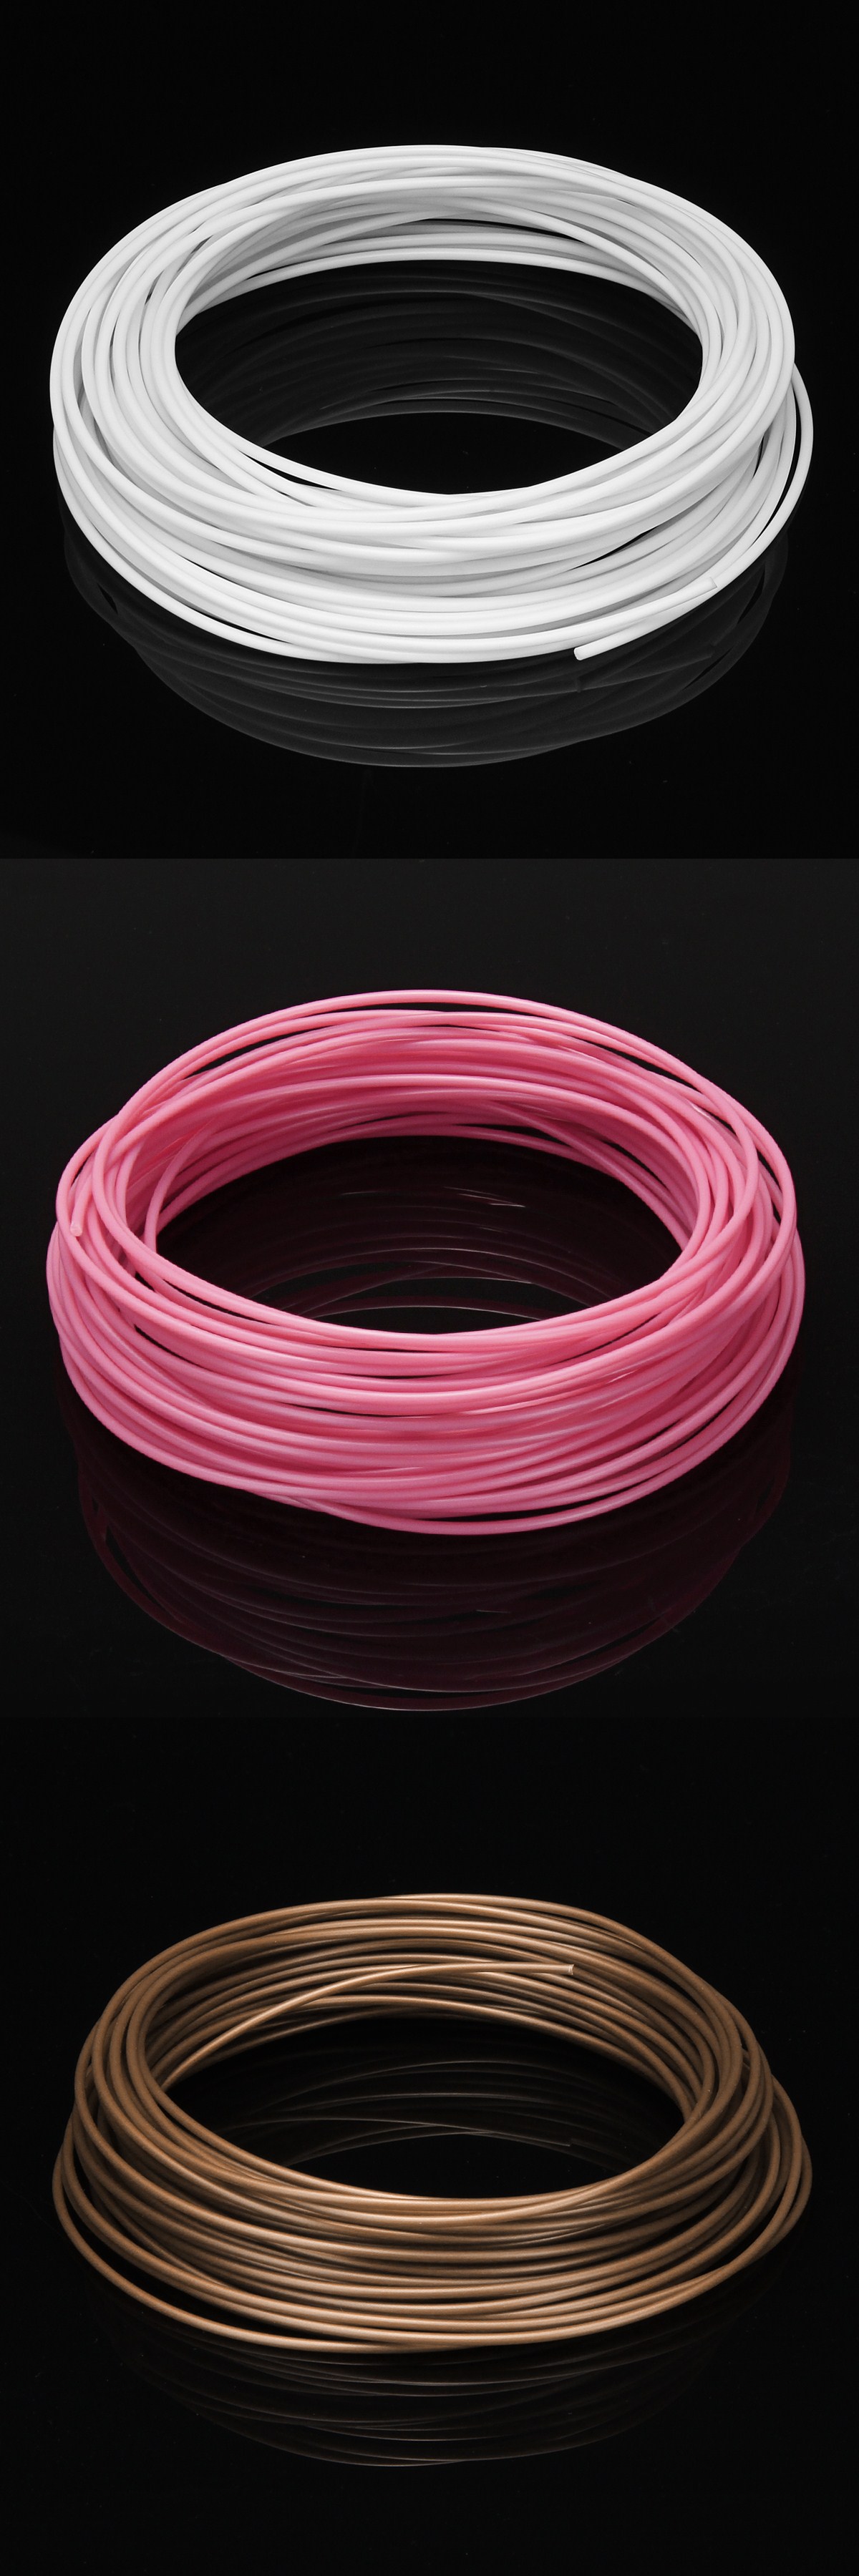 10m One Pack 1.75mm PLA Filament For 3D Printing Pen Muti-Color Chosen 13